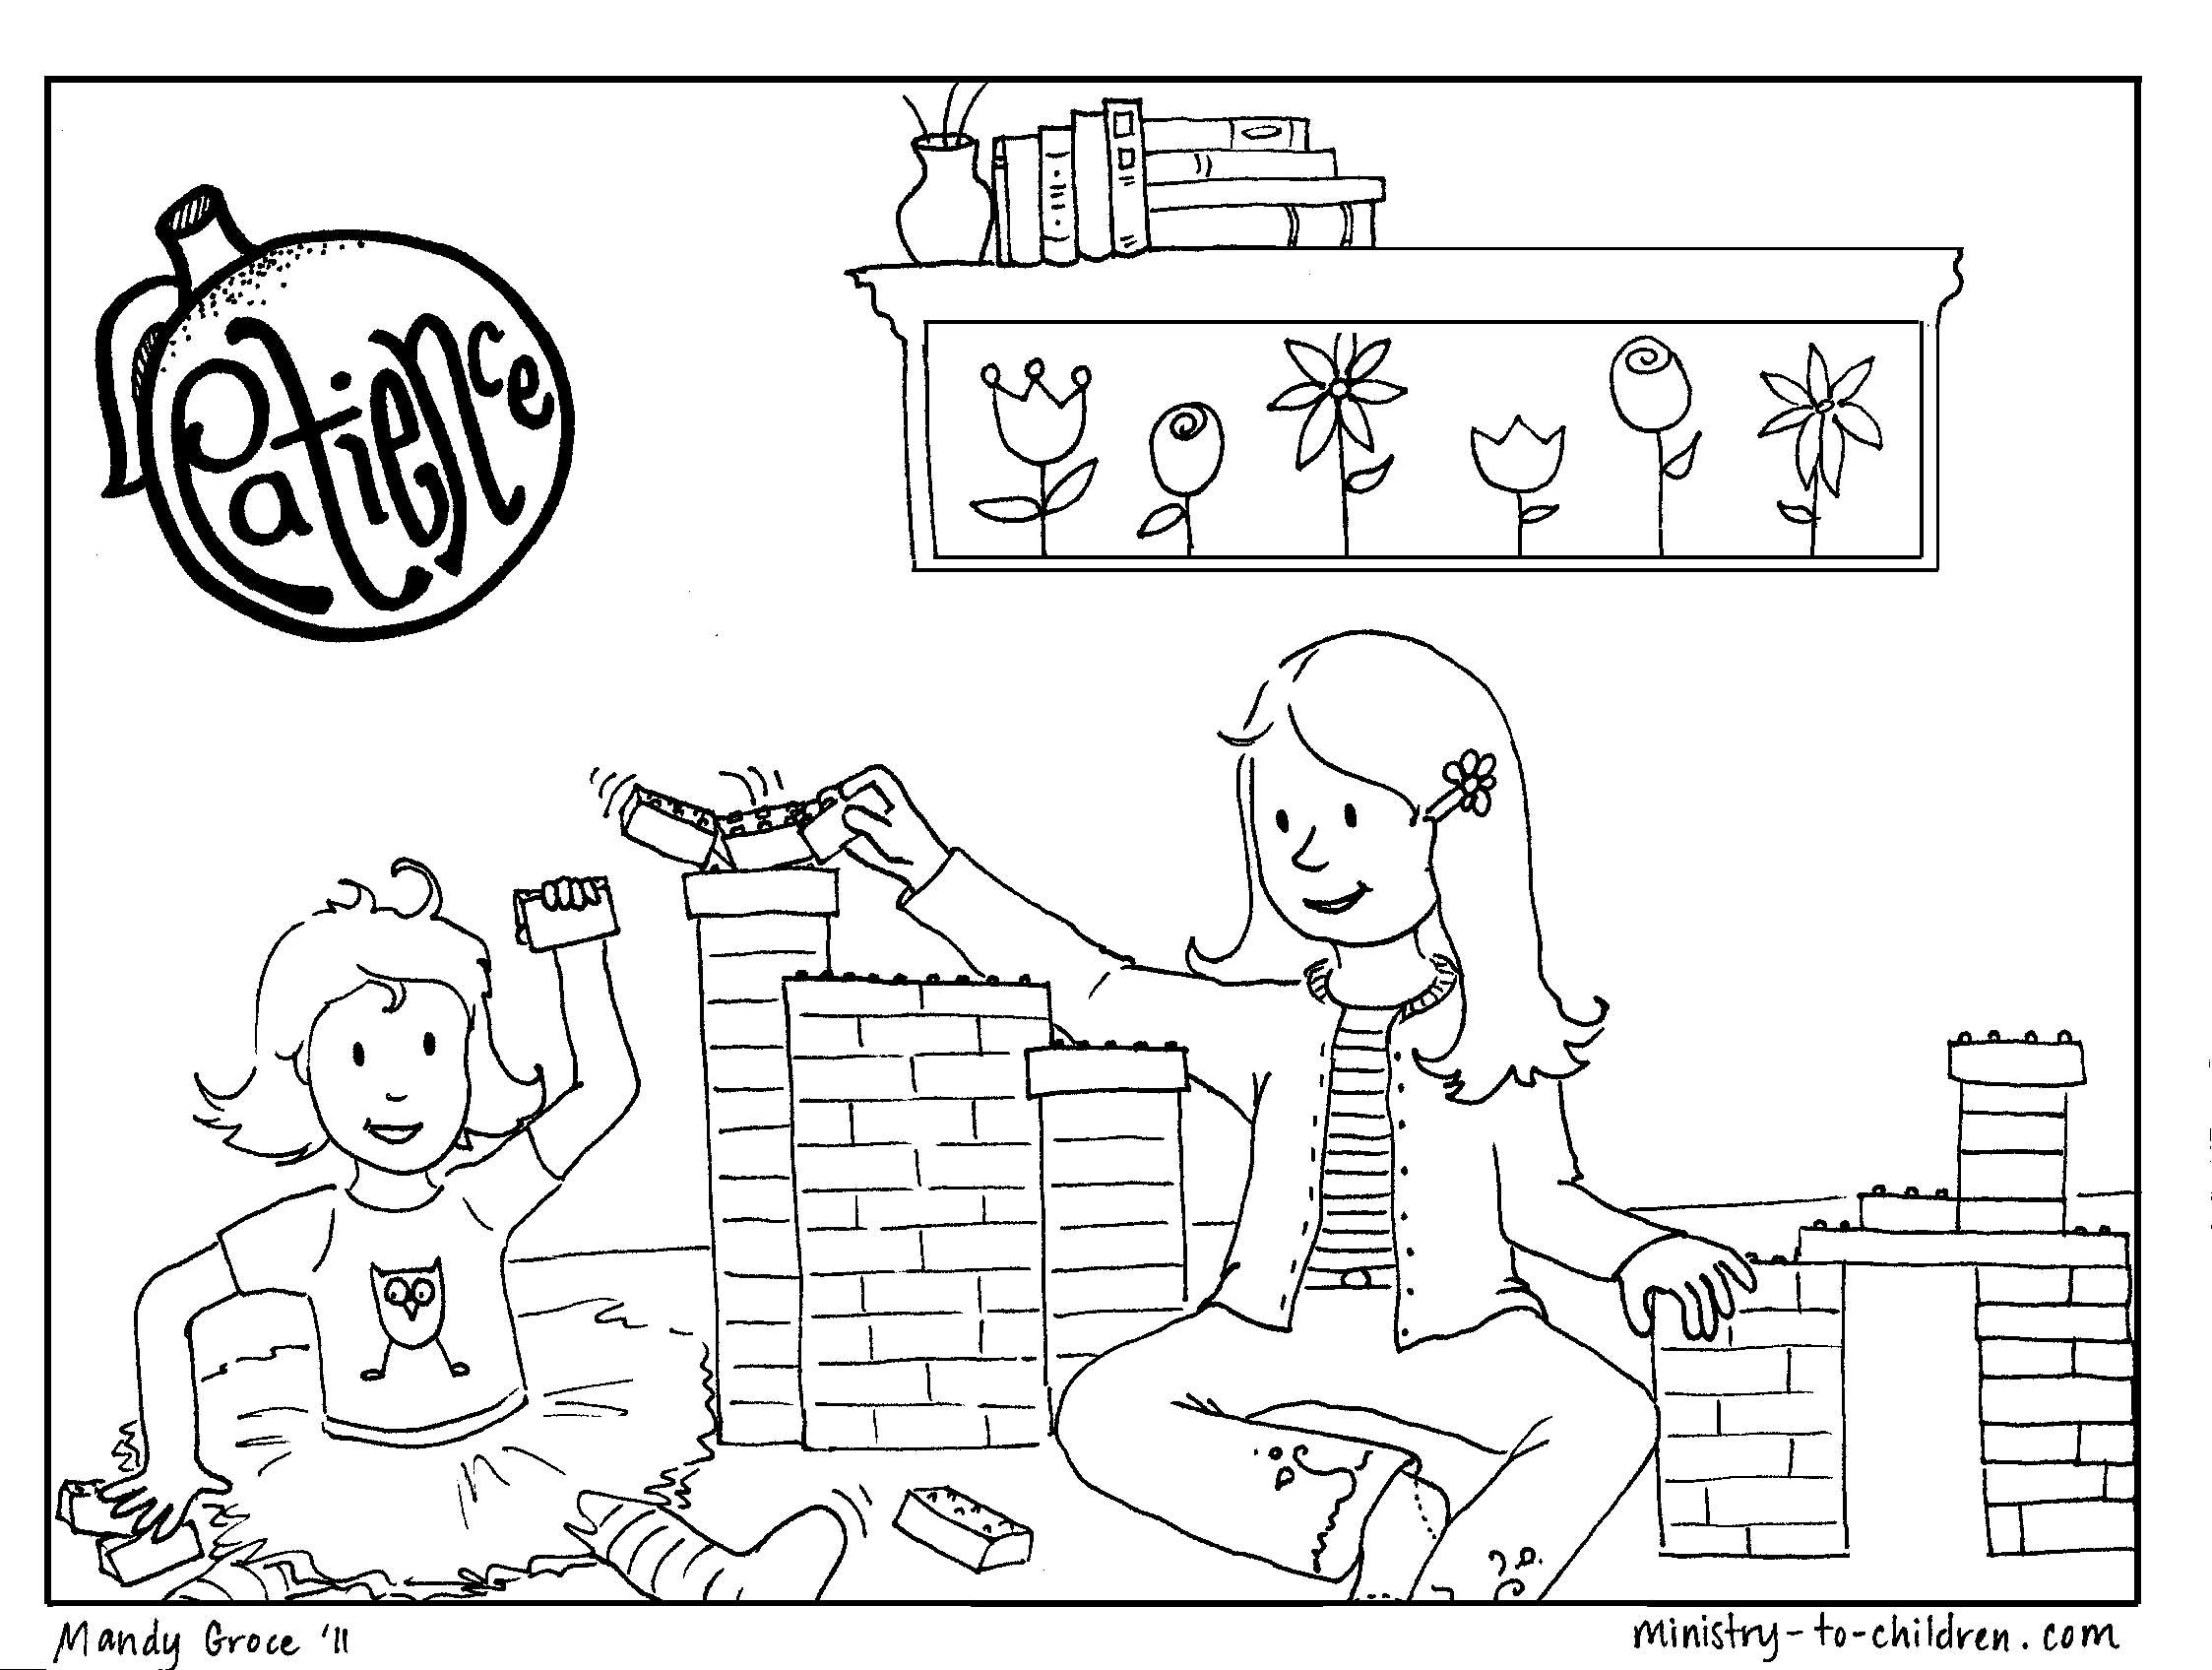 free coloring page about patience - Google Search.15.03.08 | Bible lessons  for kids, Bible coloring pages, Fruit of the spirit